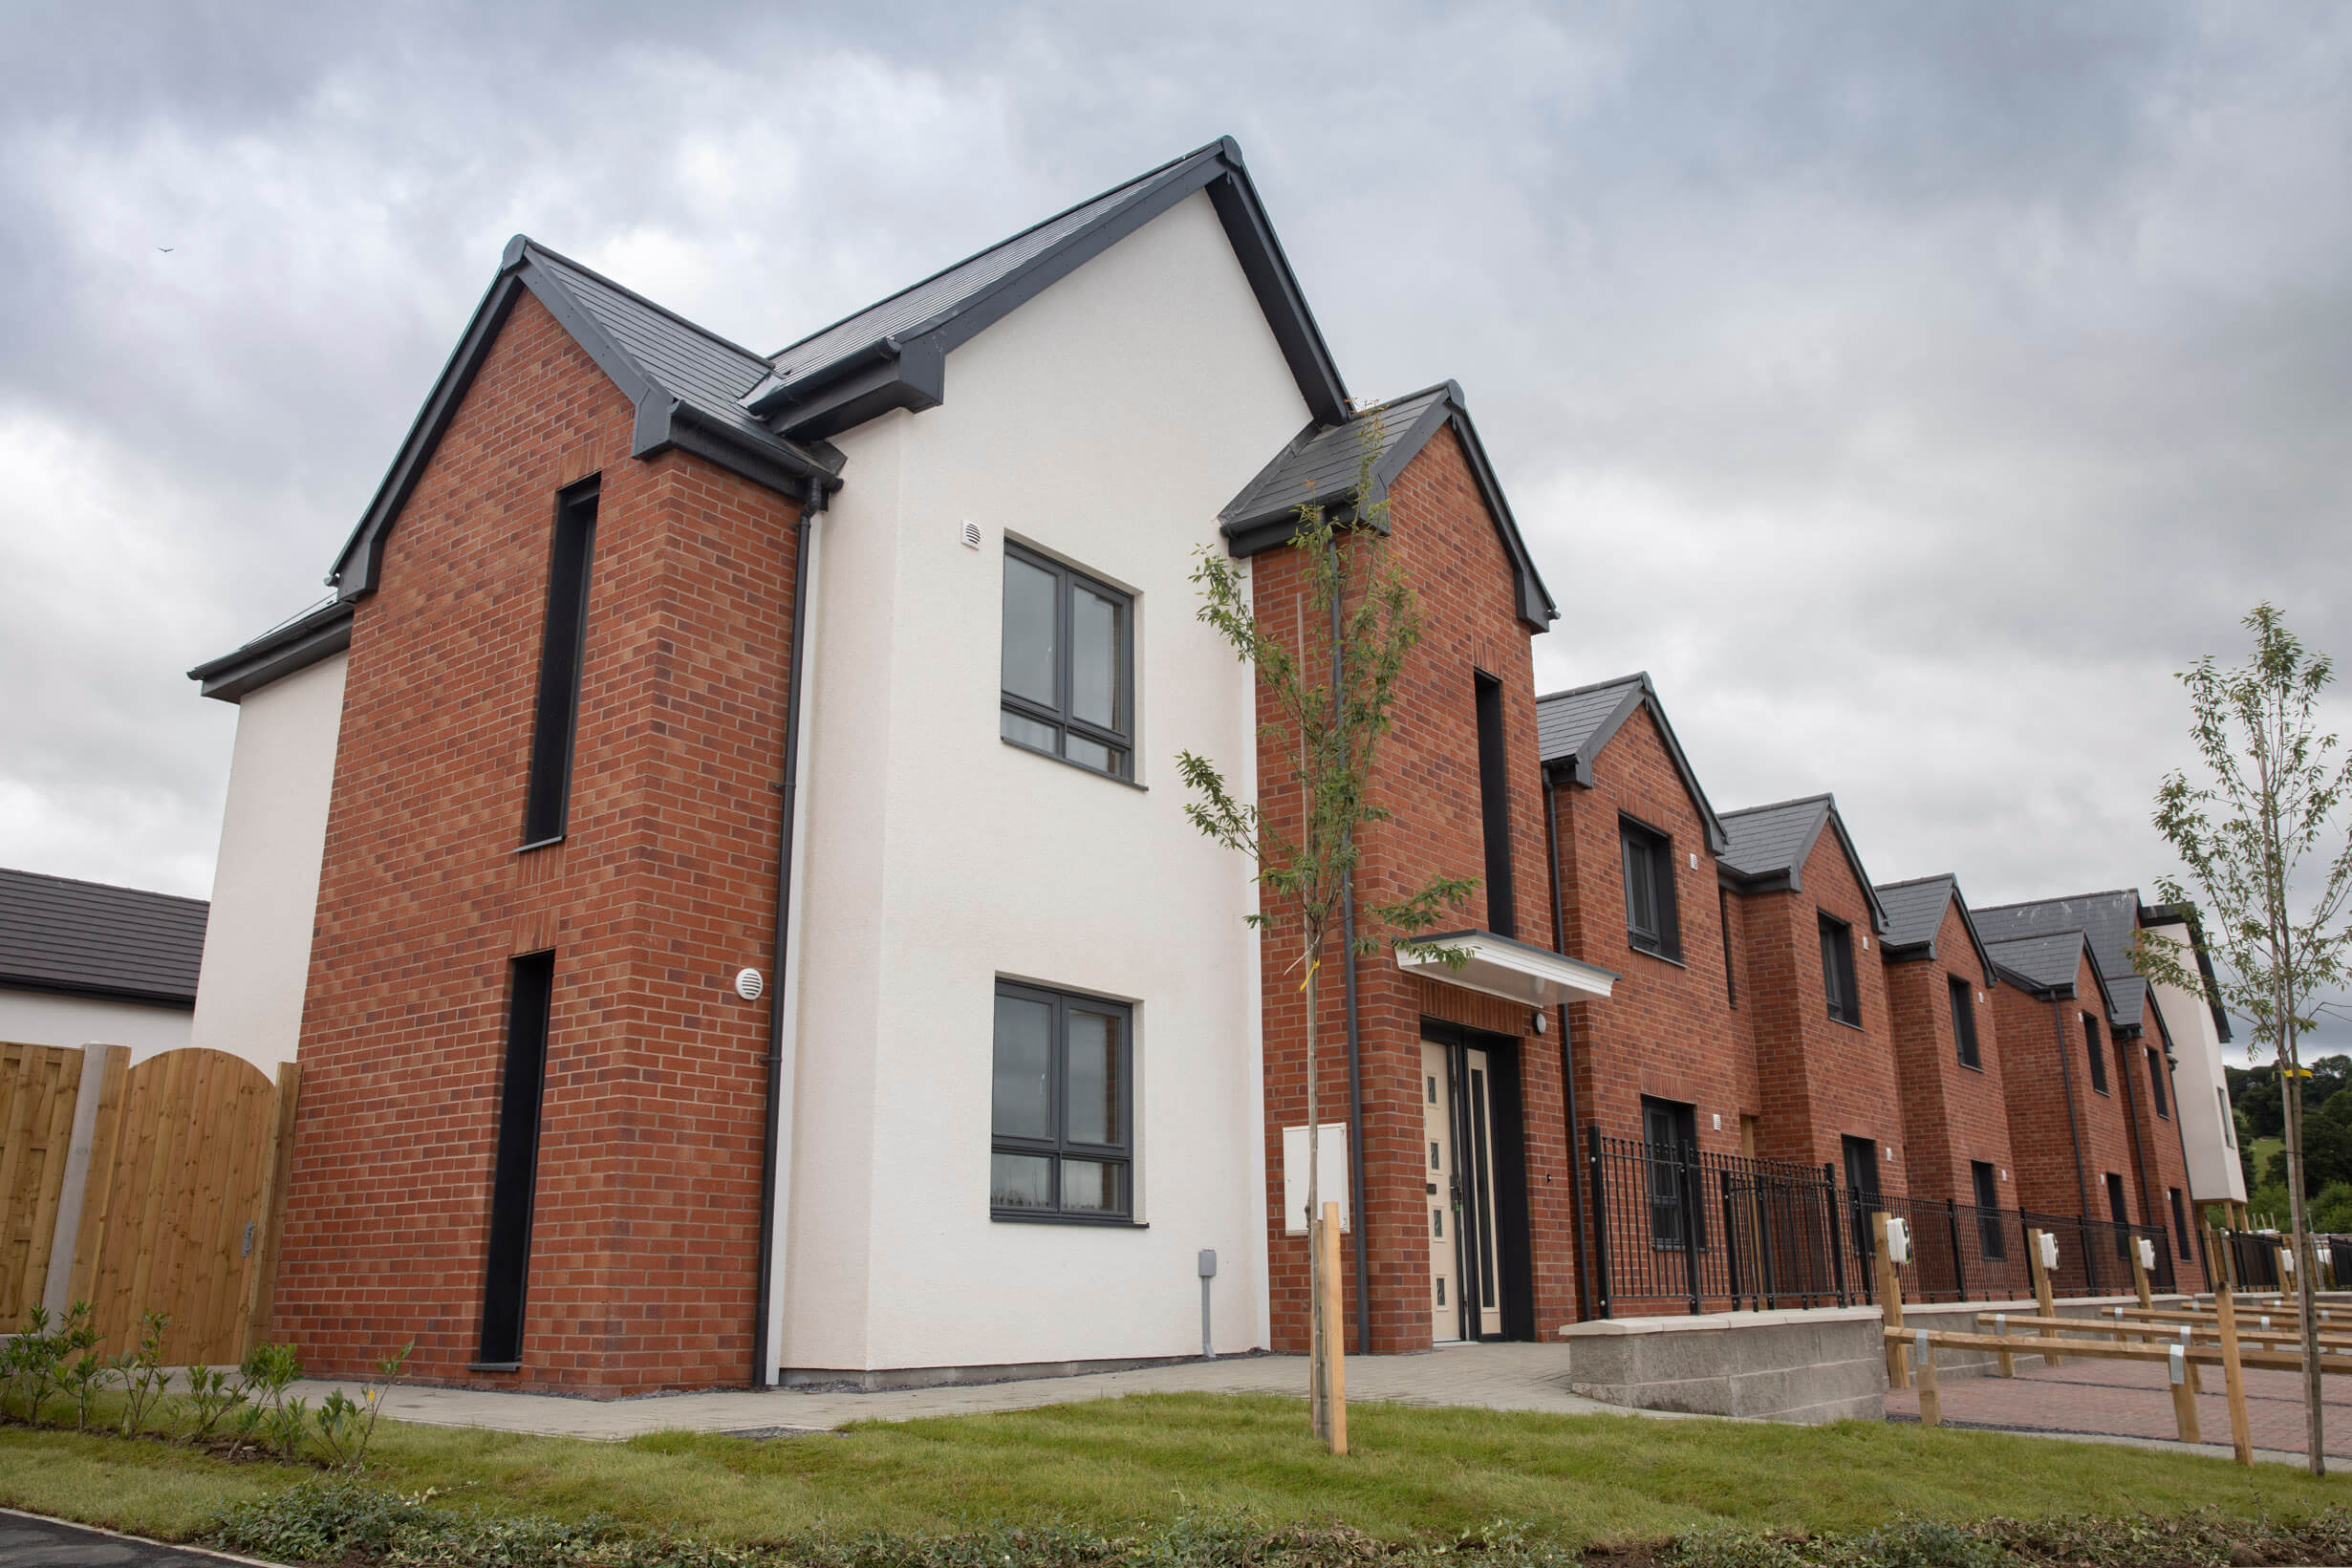 Tenants move into their new homes in Denbighshire